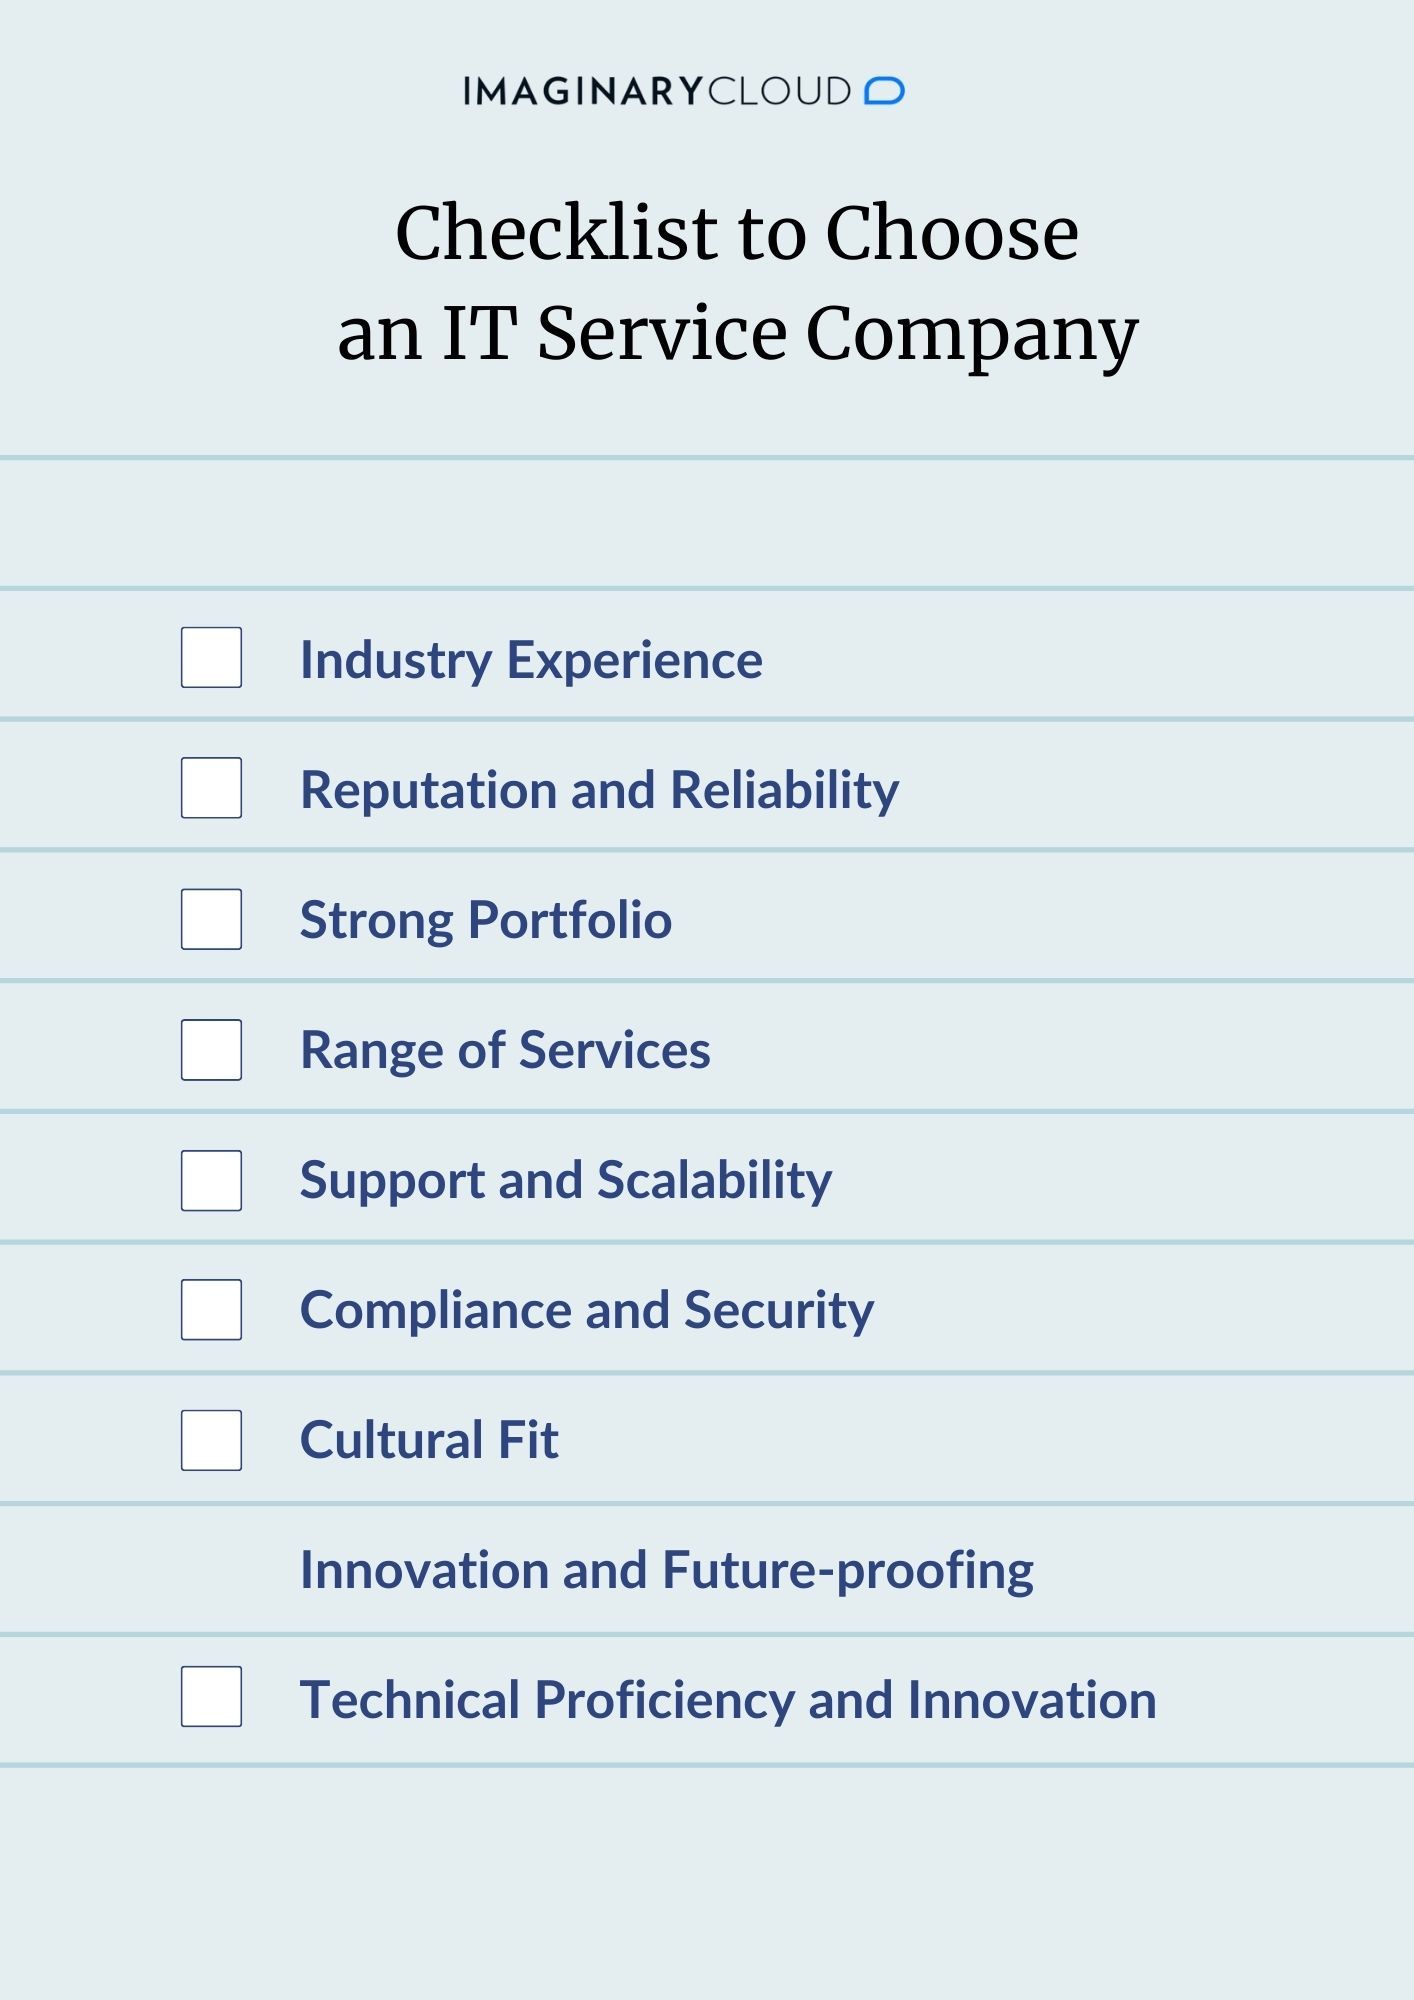 Checklist to Choose an IT Service Company